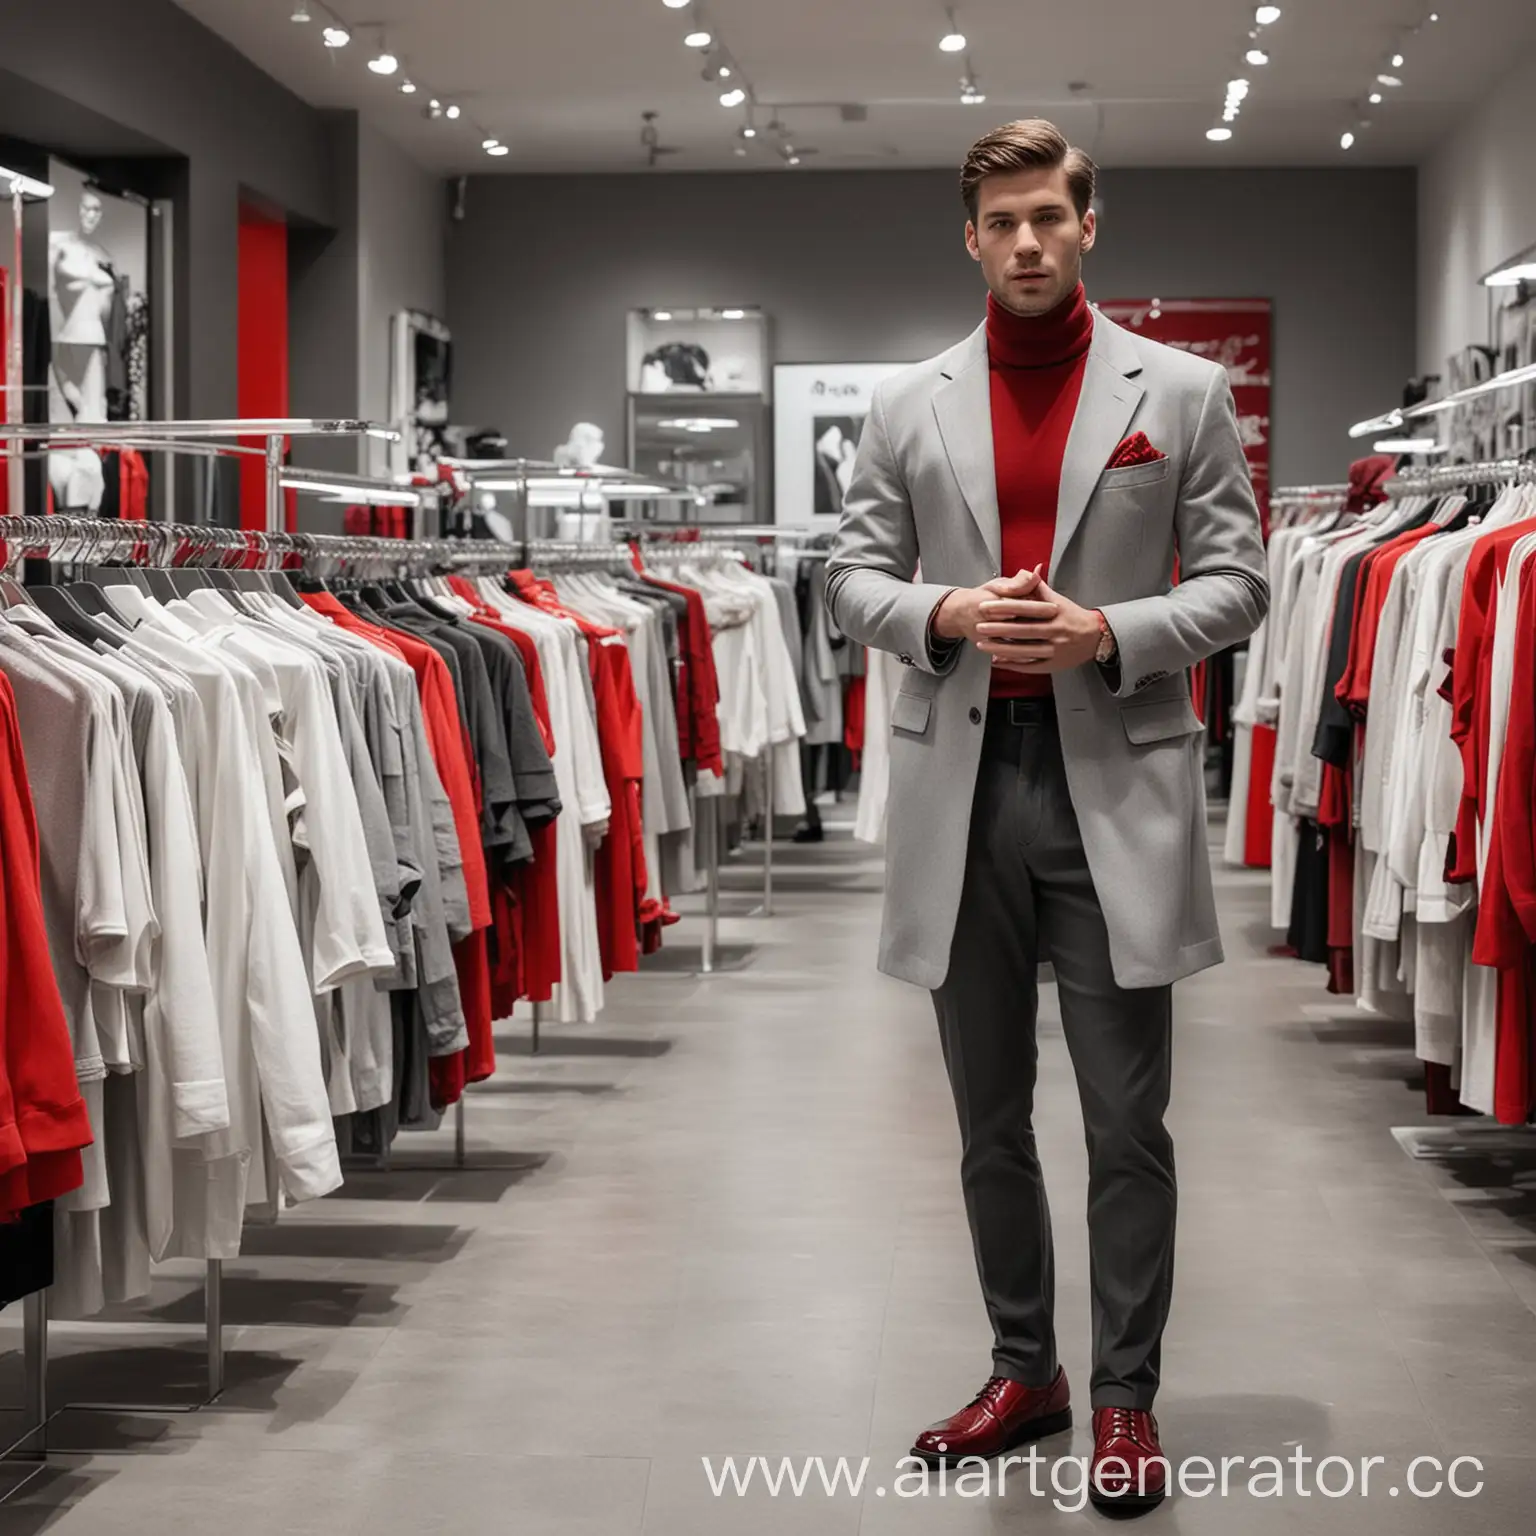 Secret-Buyer-in-Clothing-Store-with-Gray-and-Red-Color-Scheme